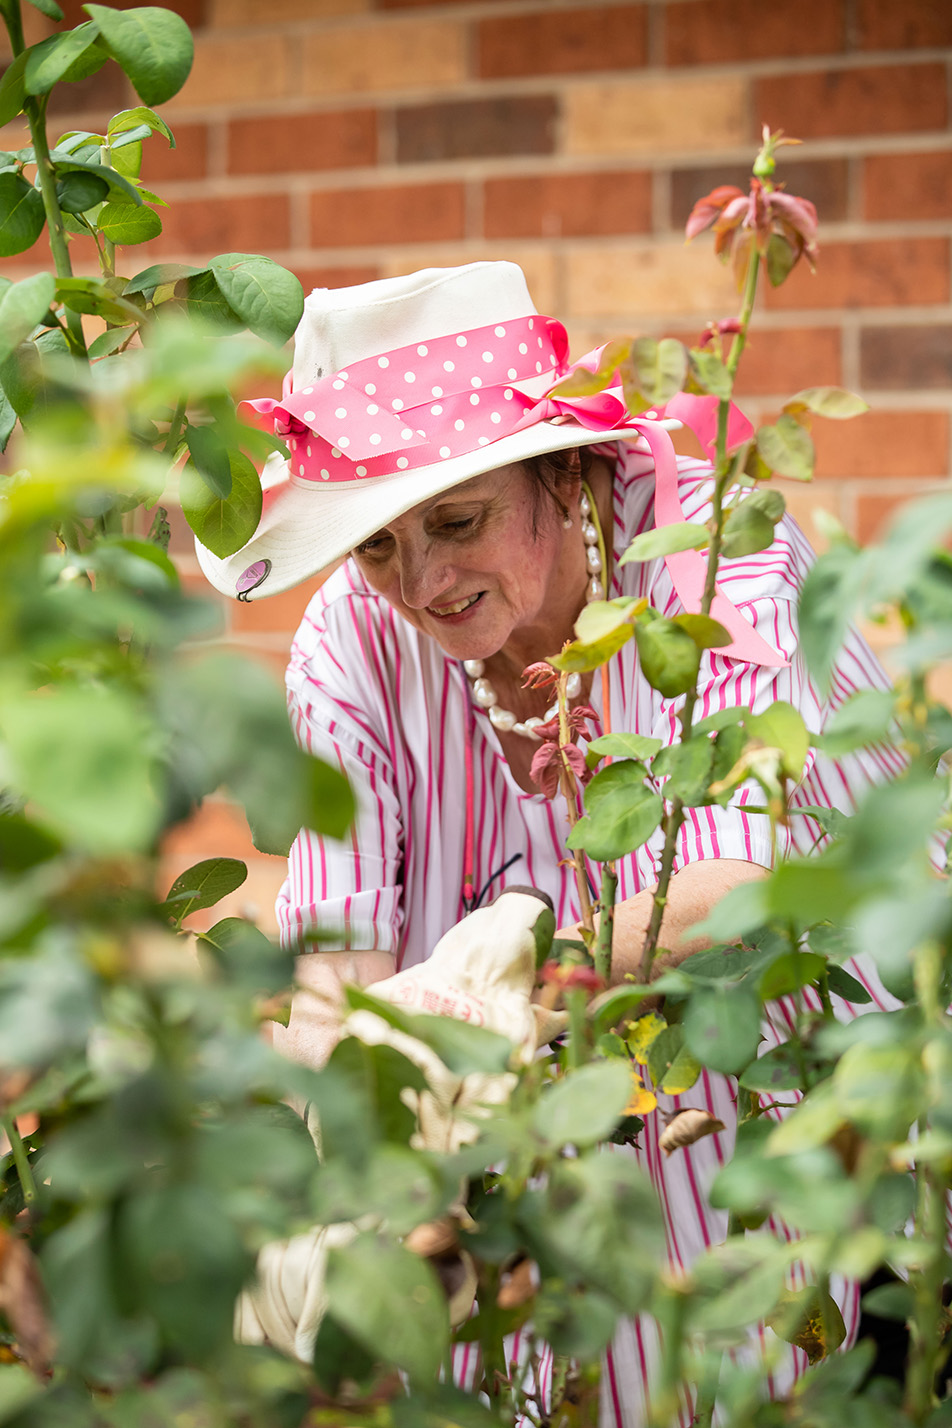 Older adult Cheryl wears a pink hat and pink top as she works in her garden, surrounded by green plants